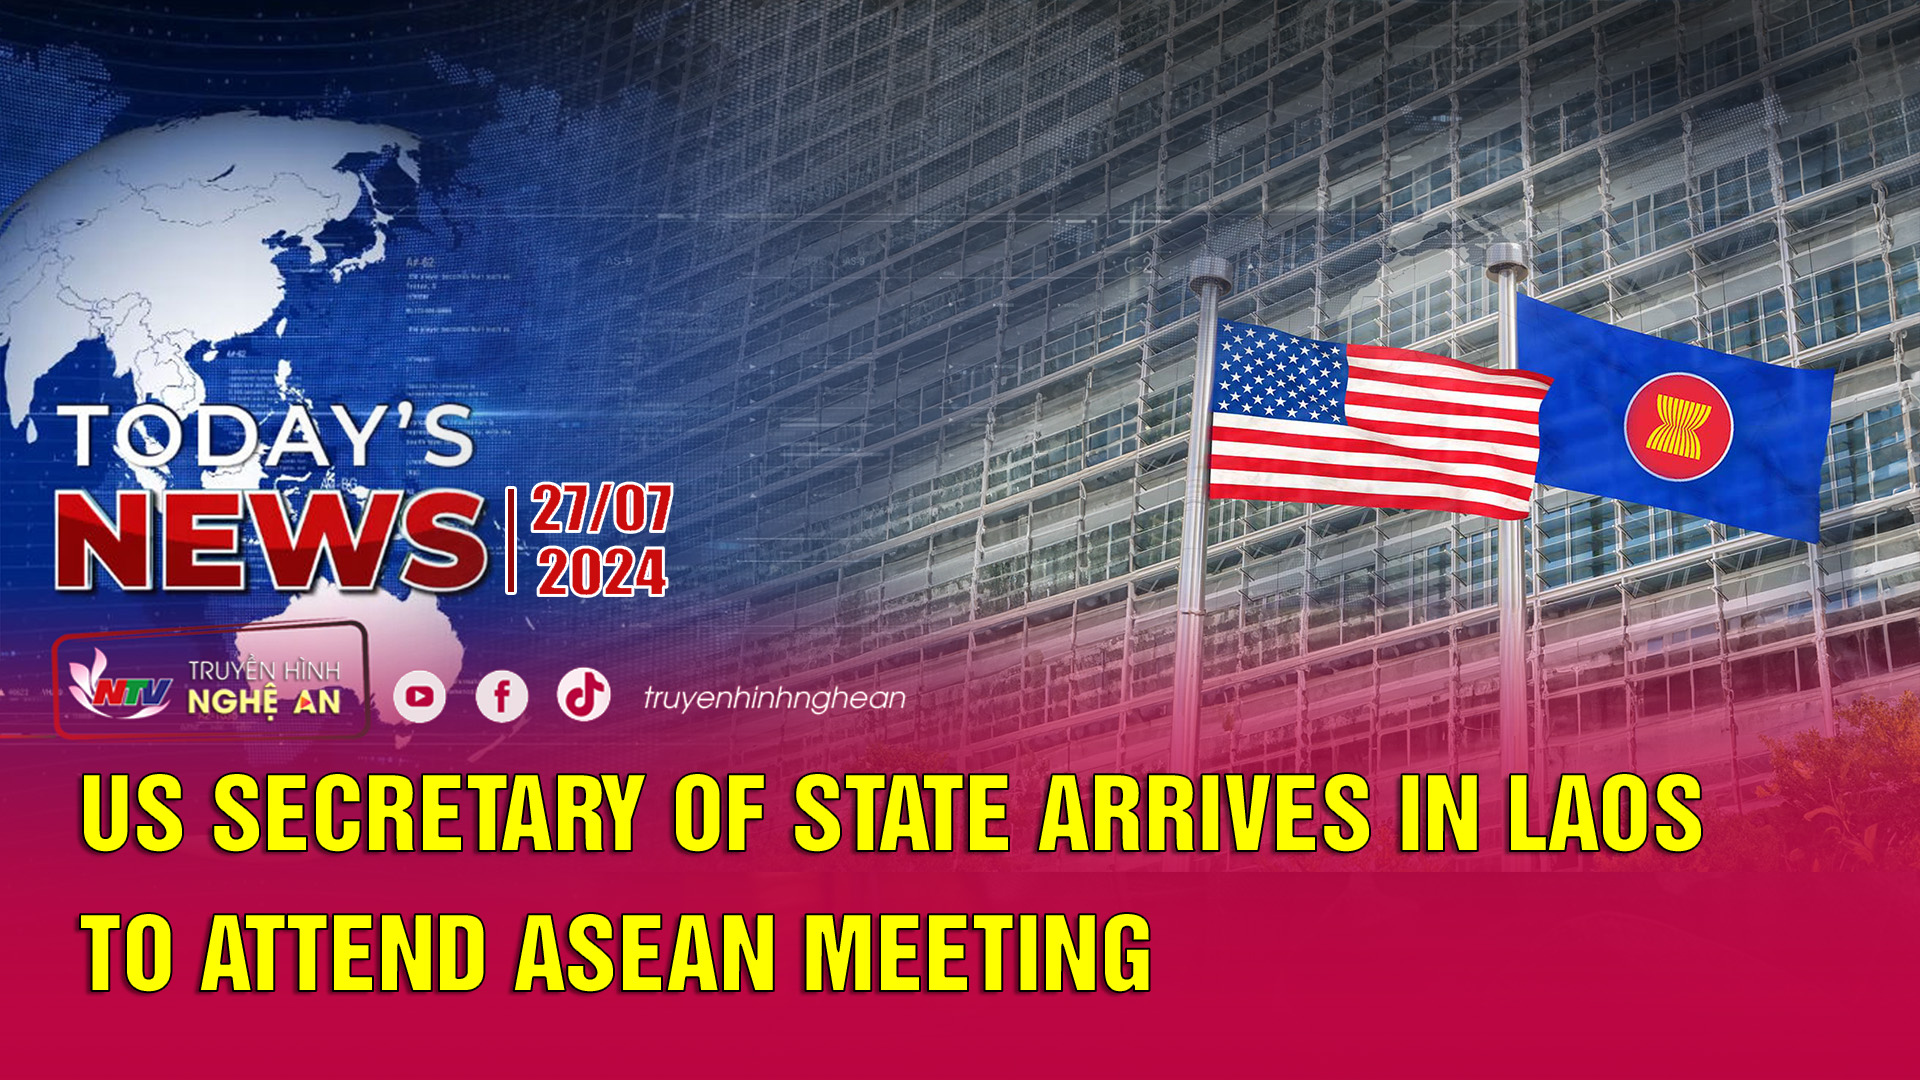 Today's News 27/07/2024: US Secretary of State arrives in Laos to attend ASEAN meeting